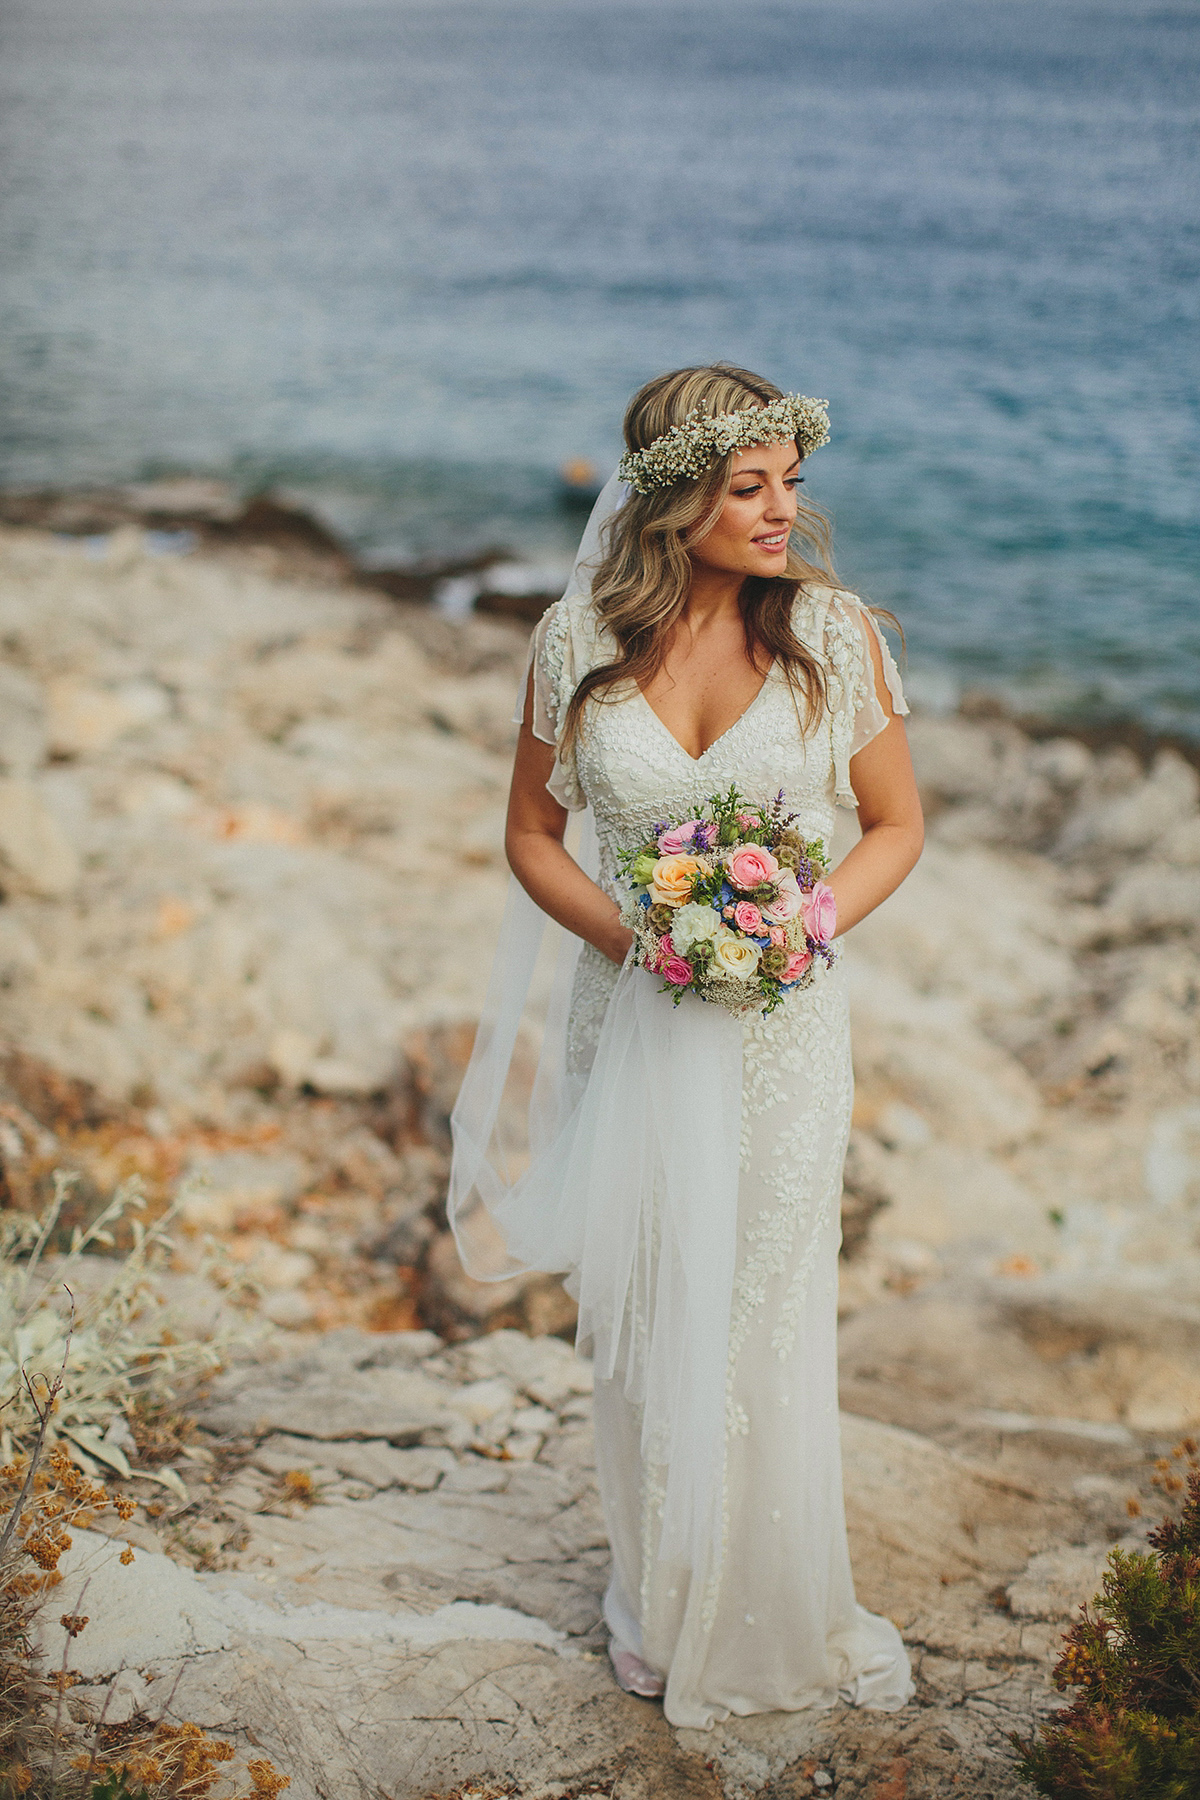 Bride Tamar wears an embellished Eliza Jane Howell gown and crown of gypsophila for her Croatian Island wedding. Photography by Petar Jurica.